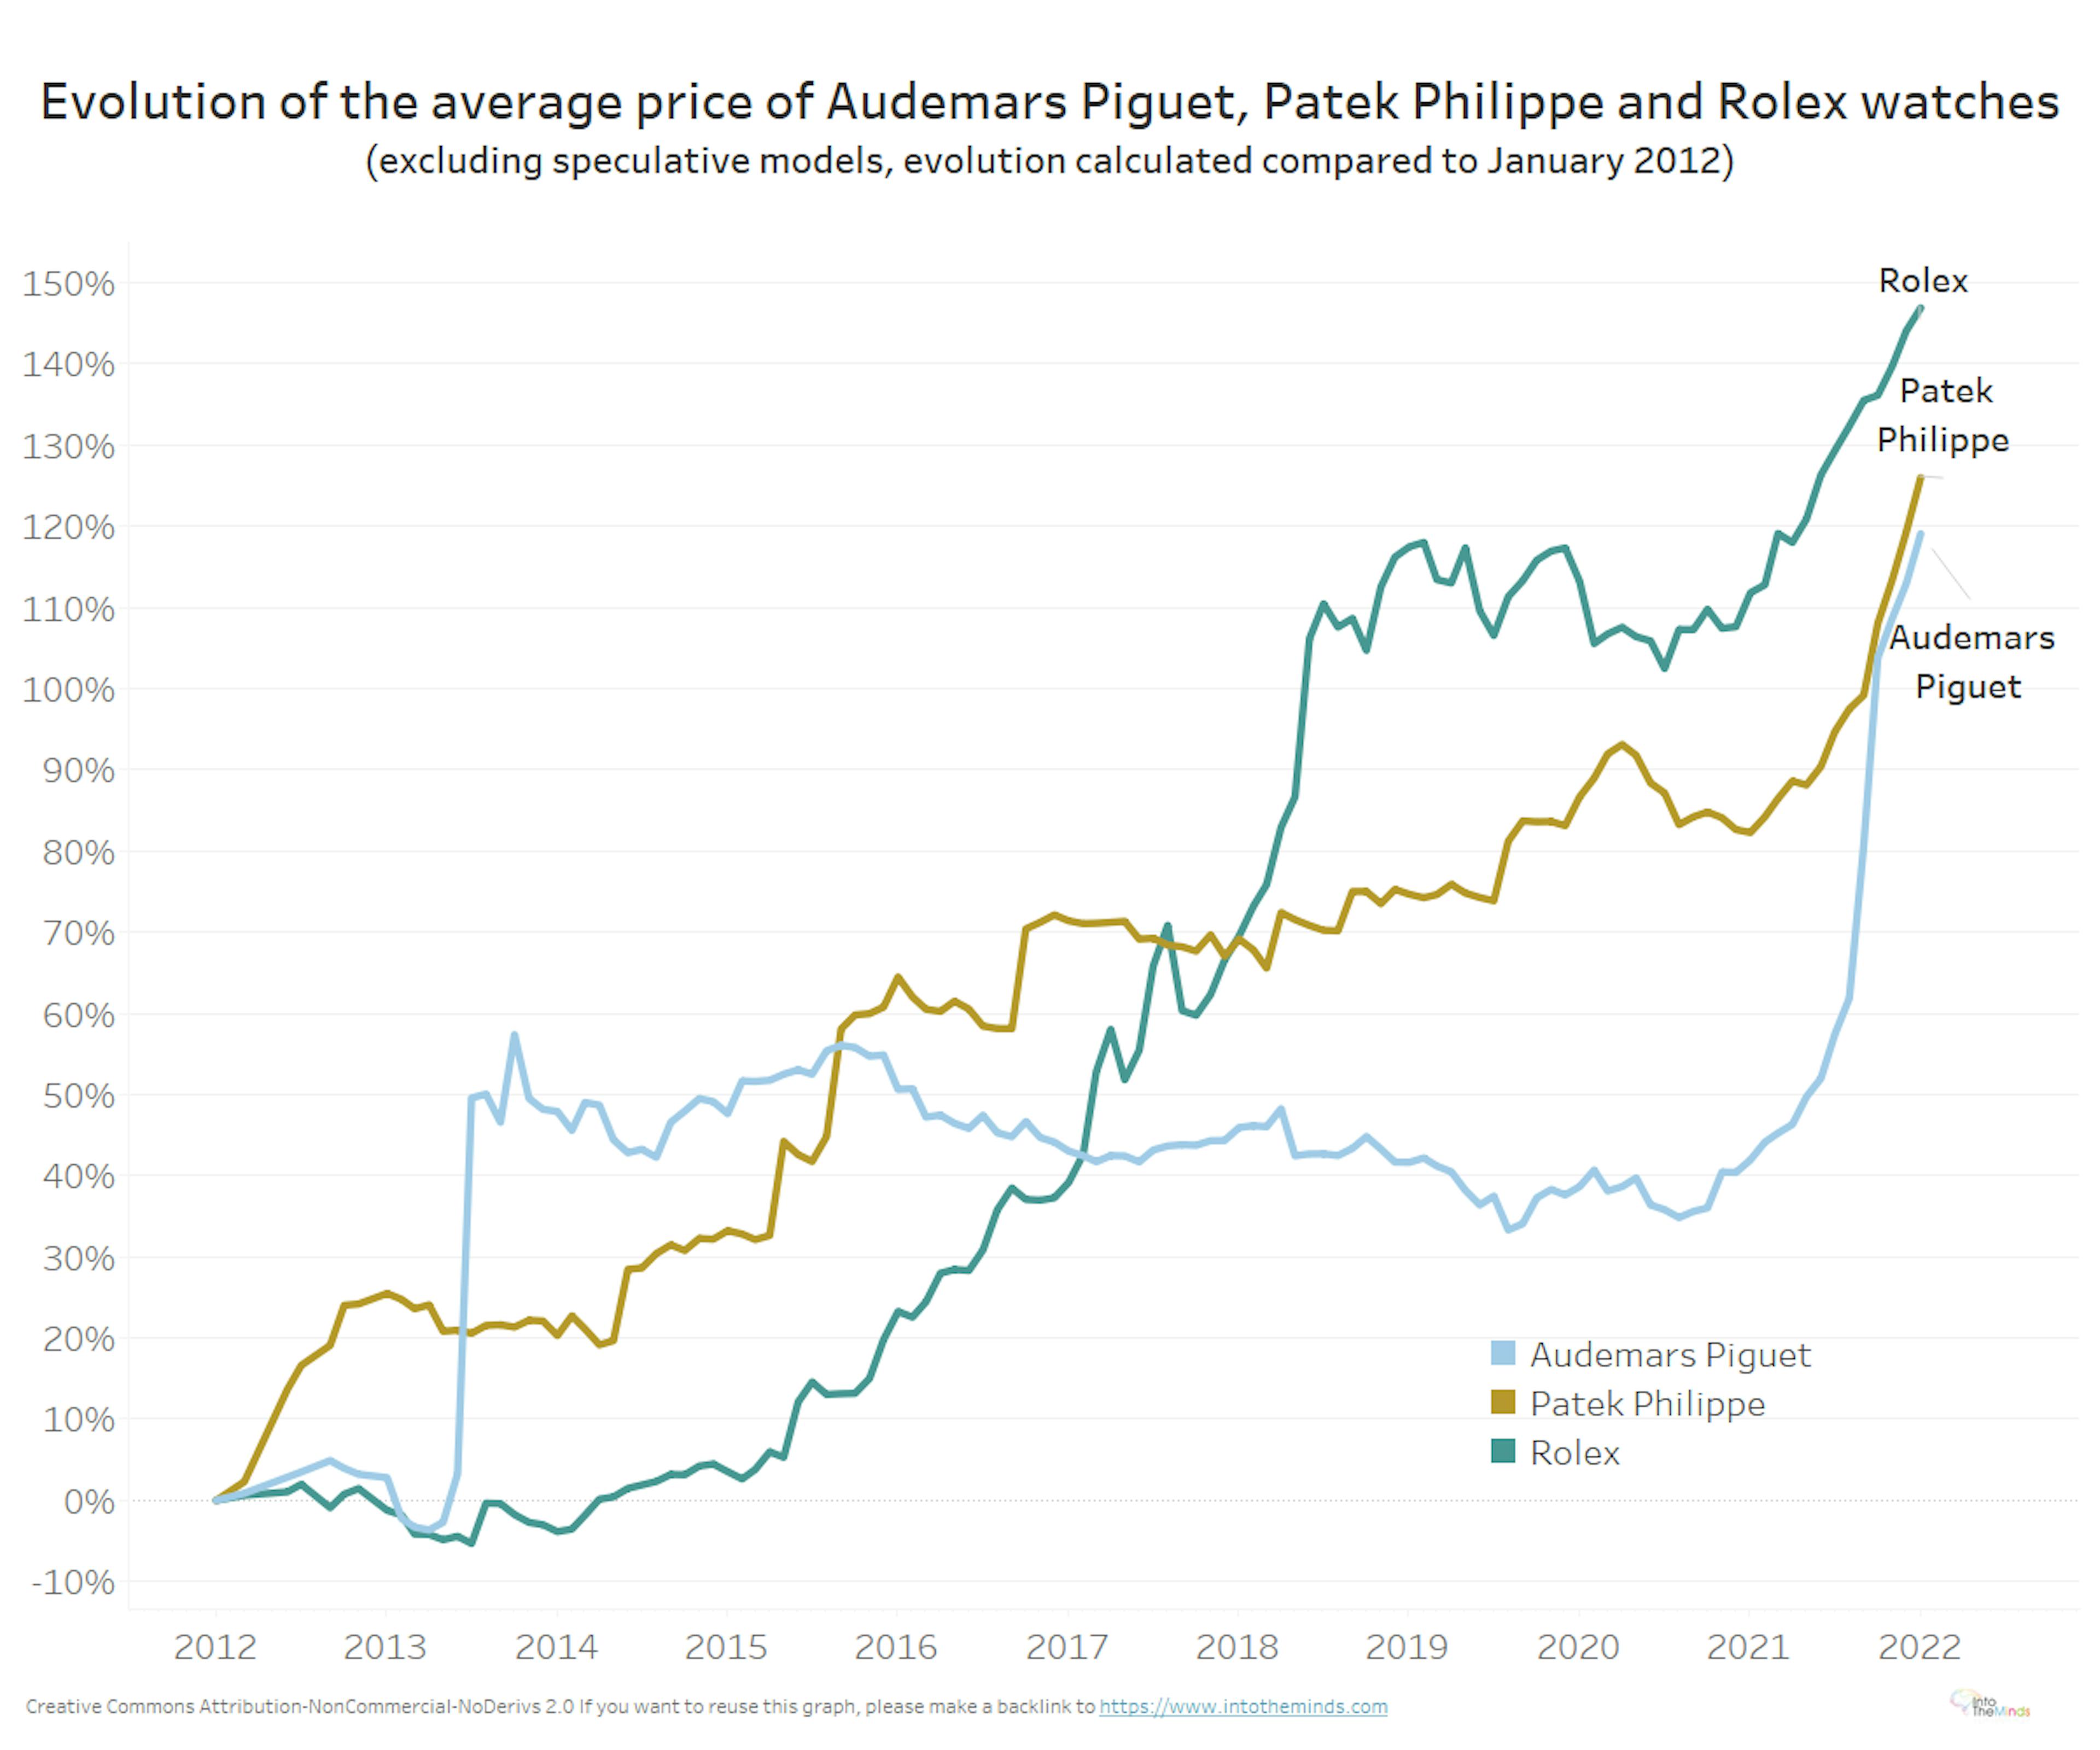 Evolution of the average price of Rolex, Audemars Piguet and Patek Philippe watches